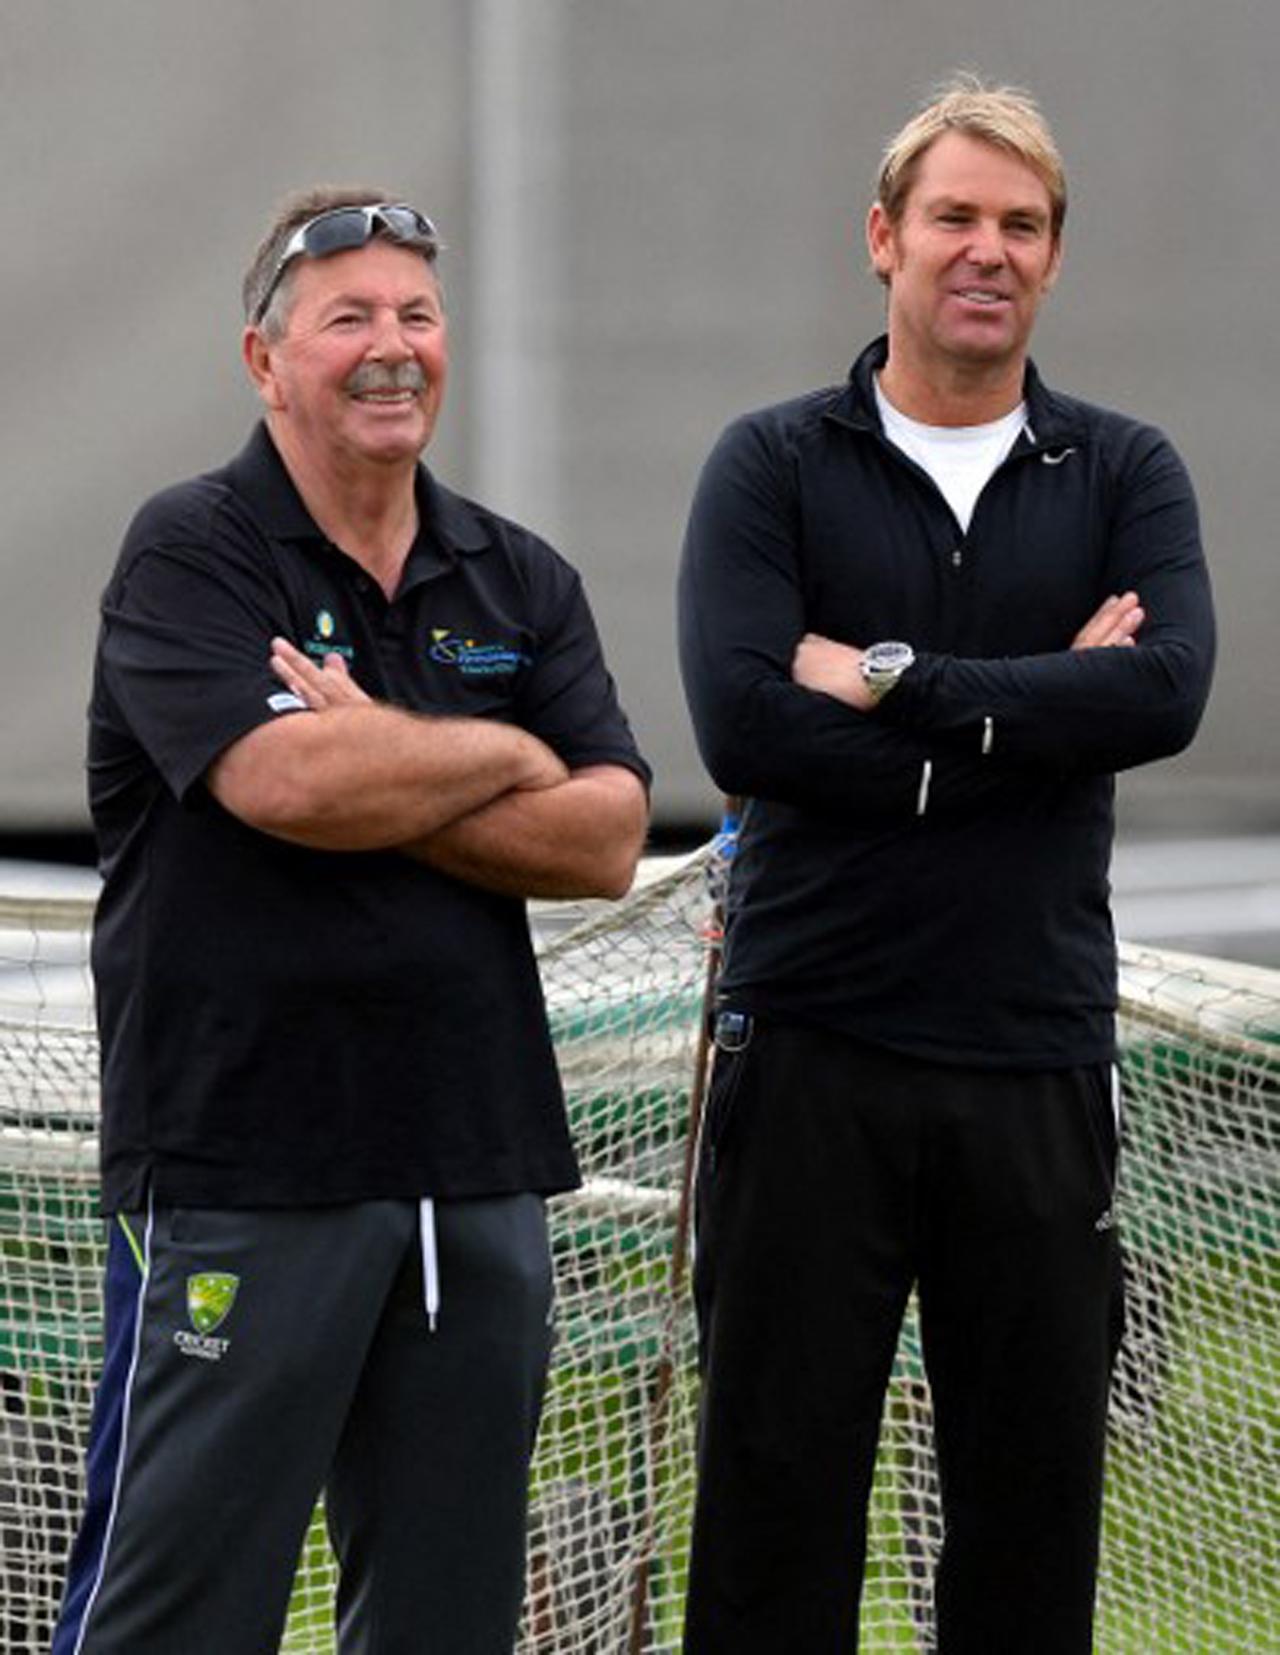 A file photo taken on July 31, 2013 shows Rod Marsh (L) laughing with Shane Warne as they watch a practice session ahead of the third Ashes Test between England and Australia at Old Trafford in Manchester. Former Australian cricketing great Marsh died earlier today after suffering a heart attack last week.